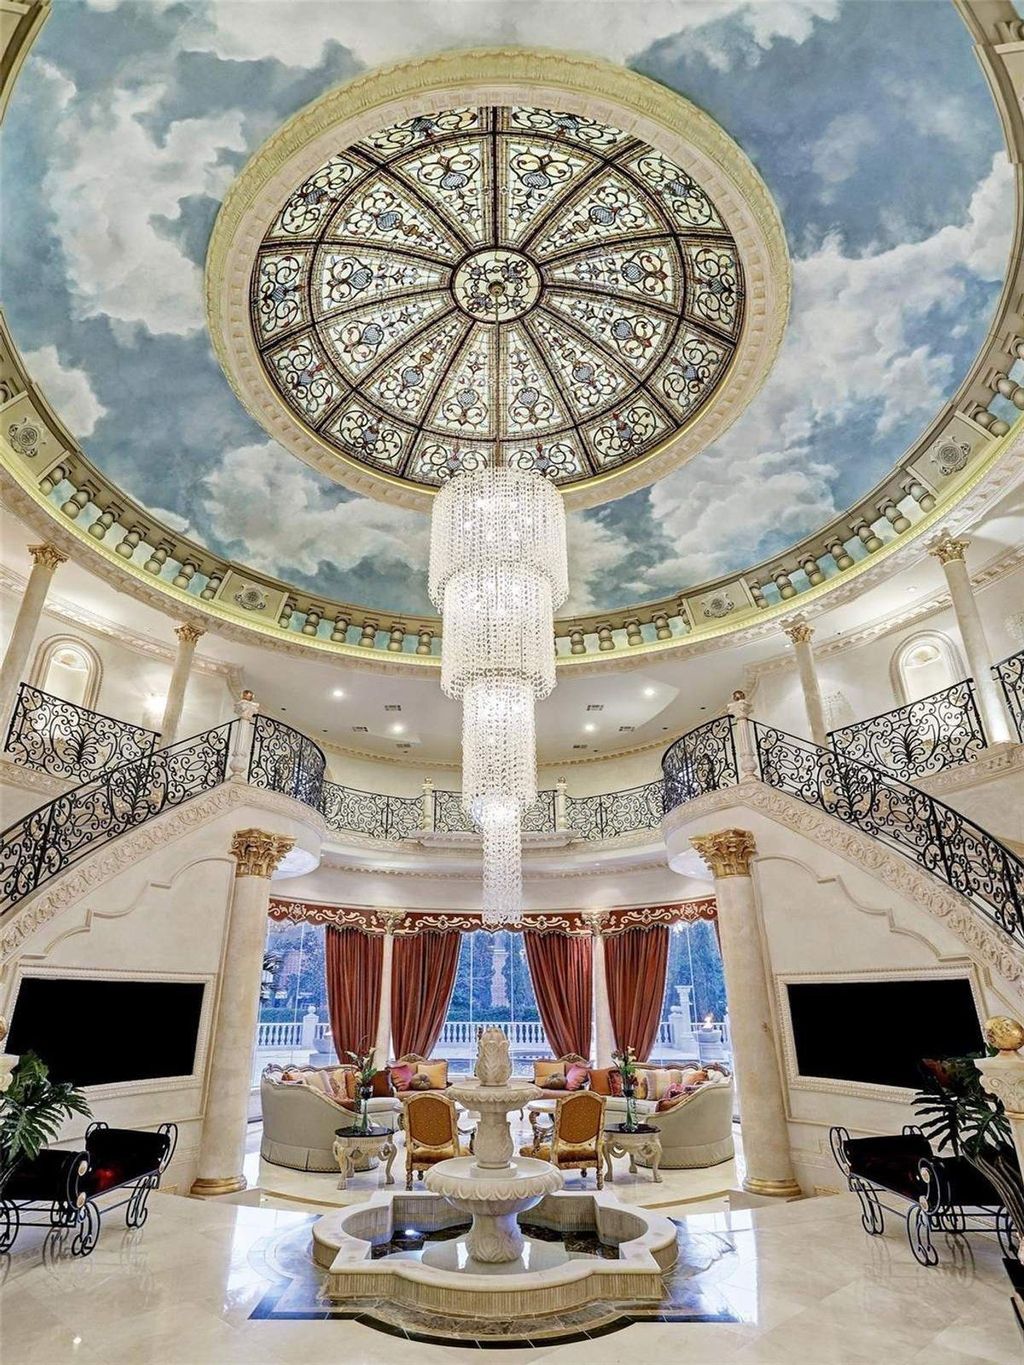 The Residence in Sugar Land, a exquisite palatial style estate constructed with many detailed and intricate moldings, marble floors, Venetian plaster walls, custom cabinetry and ornate finishes, gold leaf accents, and crystal chandeliers. This home located at 5324 Palm Royale Blvd, Sugar Land, Texas